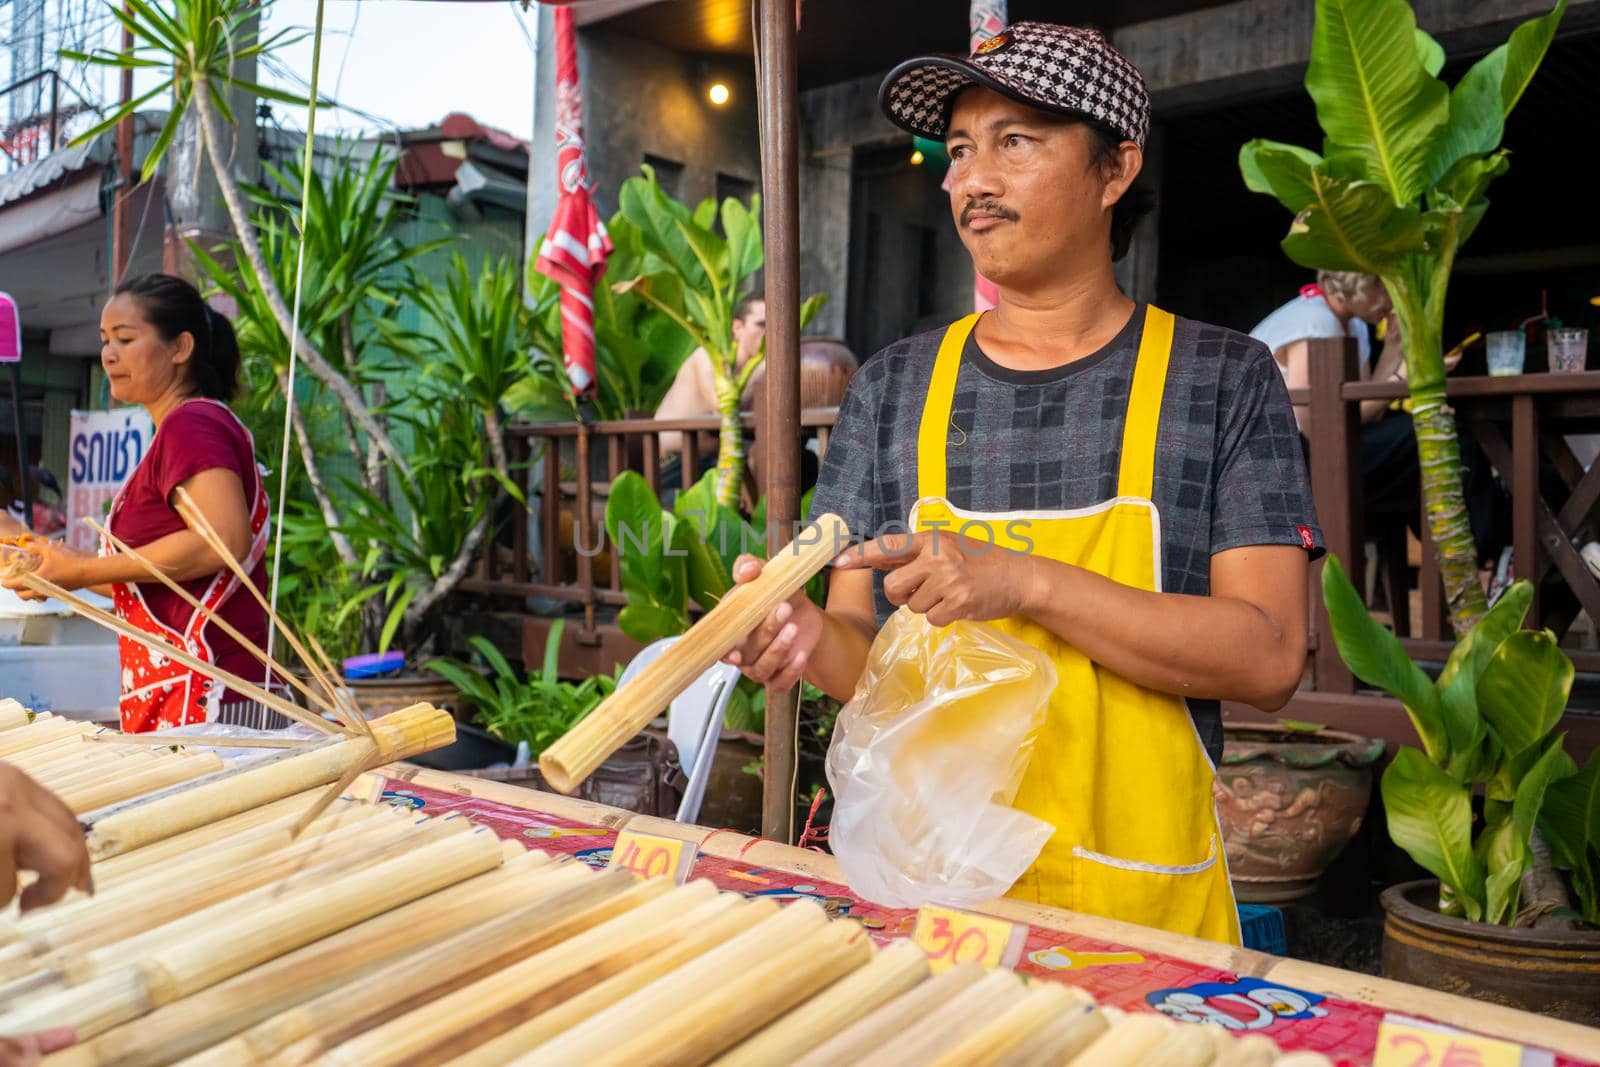 Street food market in Asia. A man sells rice in bamboo stalks.